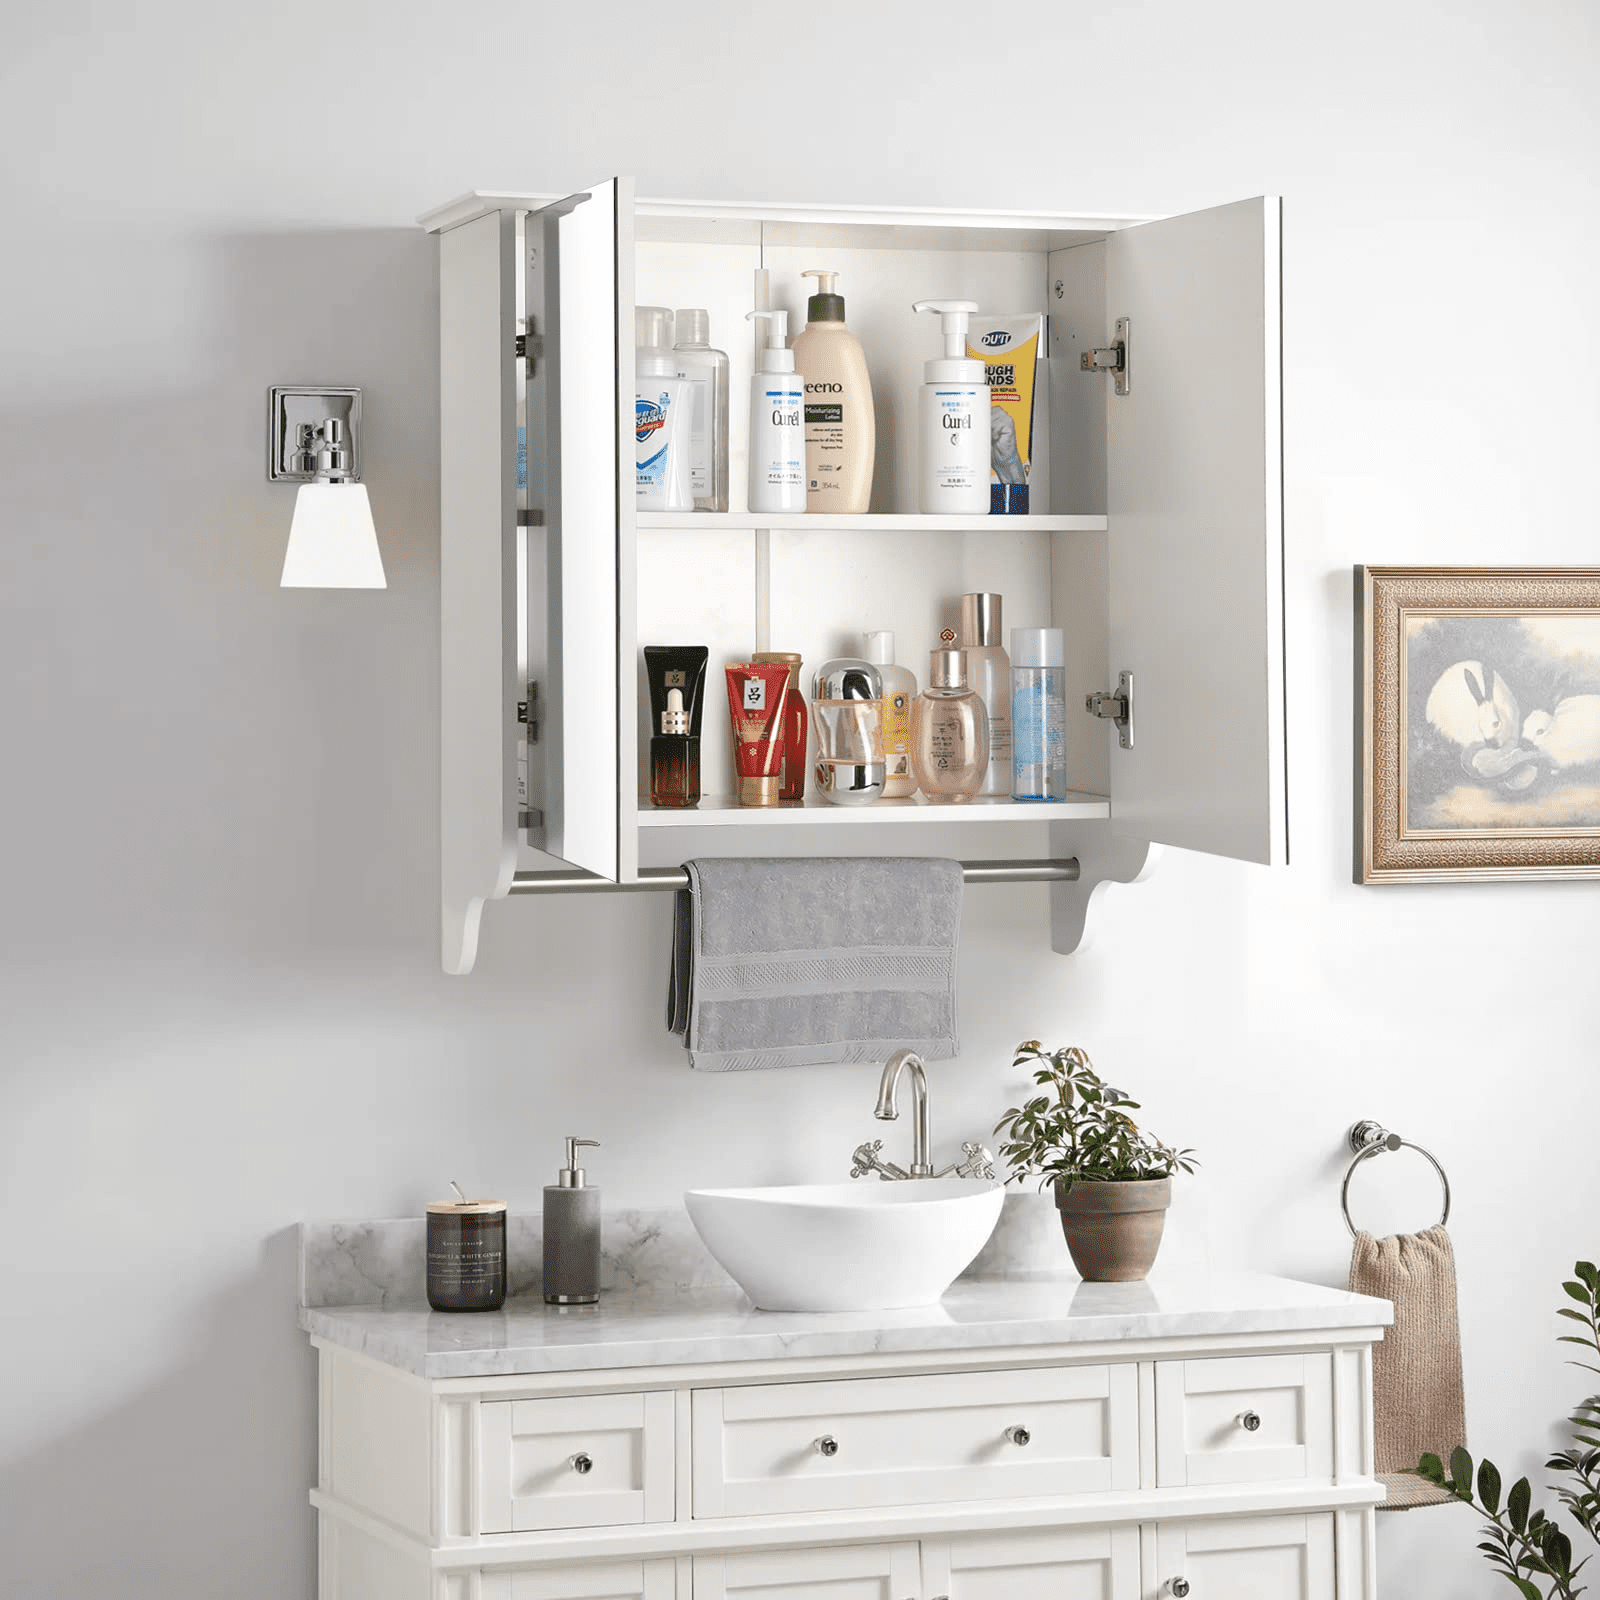 Wall-Mounted Bathroom Organizer - Medicine Cabinet or Over-the-Toilet  Storage with Stylish Shutter Doors and Towel Bar by Lavish Home (White)